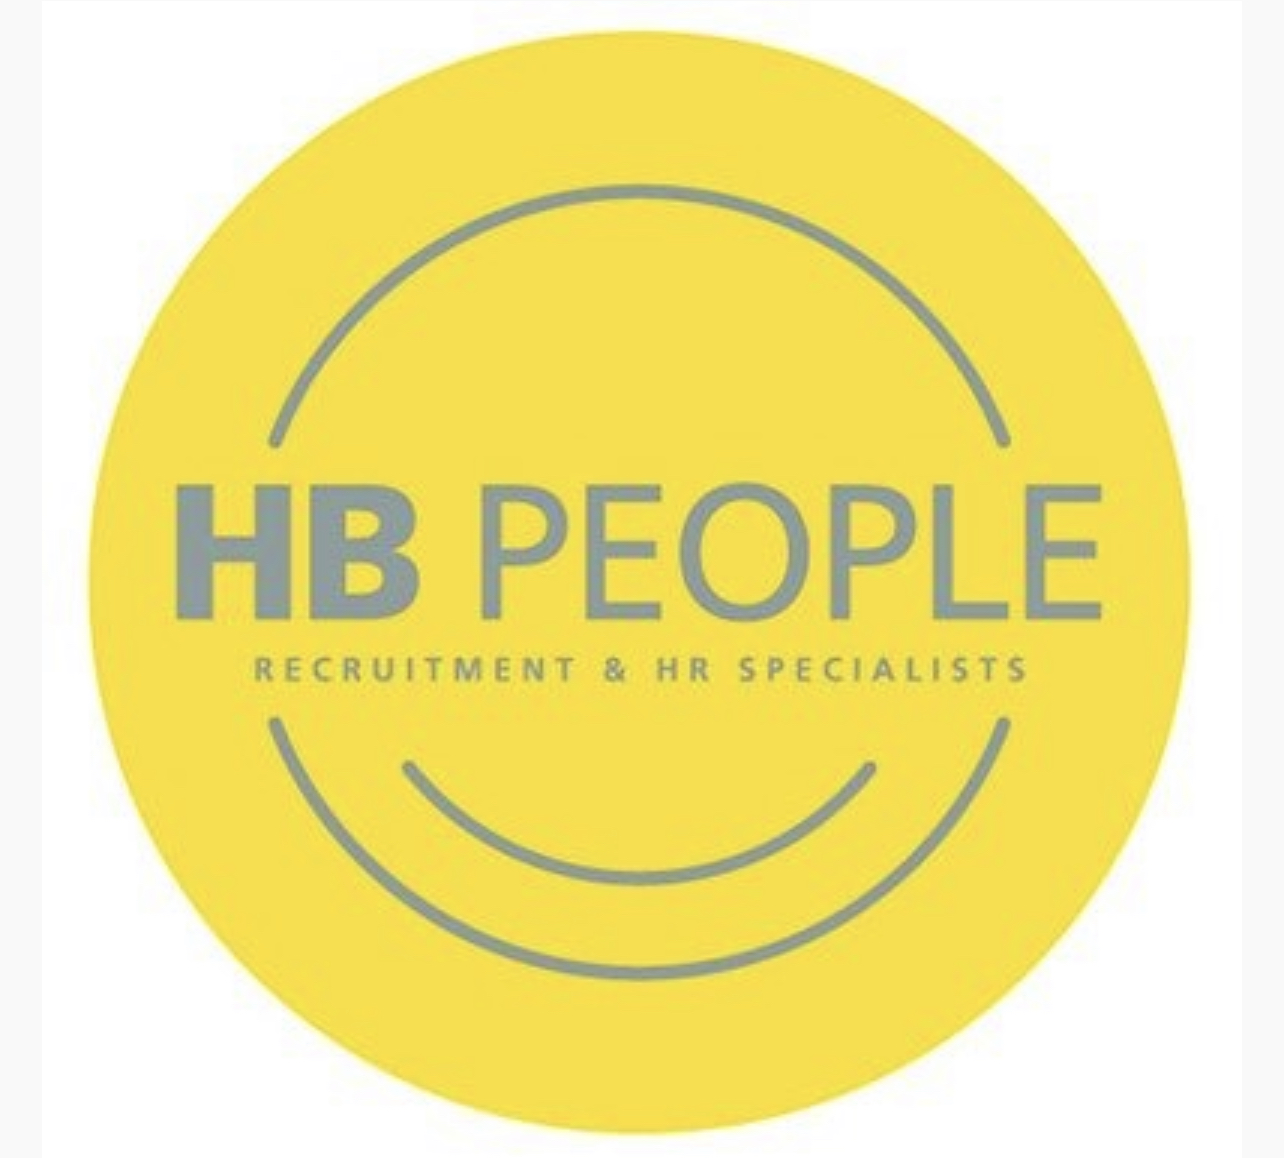 HB People - Recruitment & HR Specialists